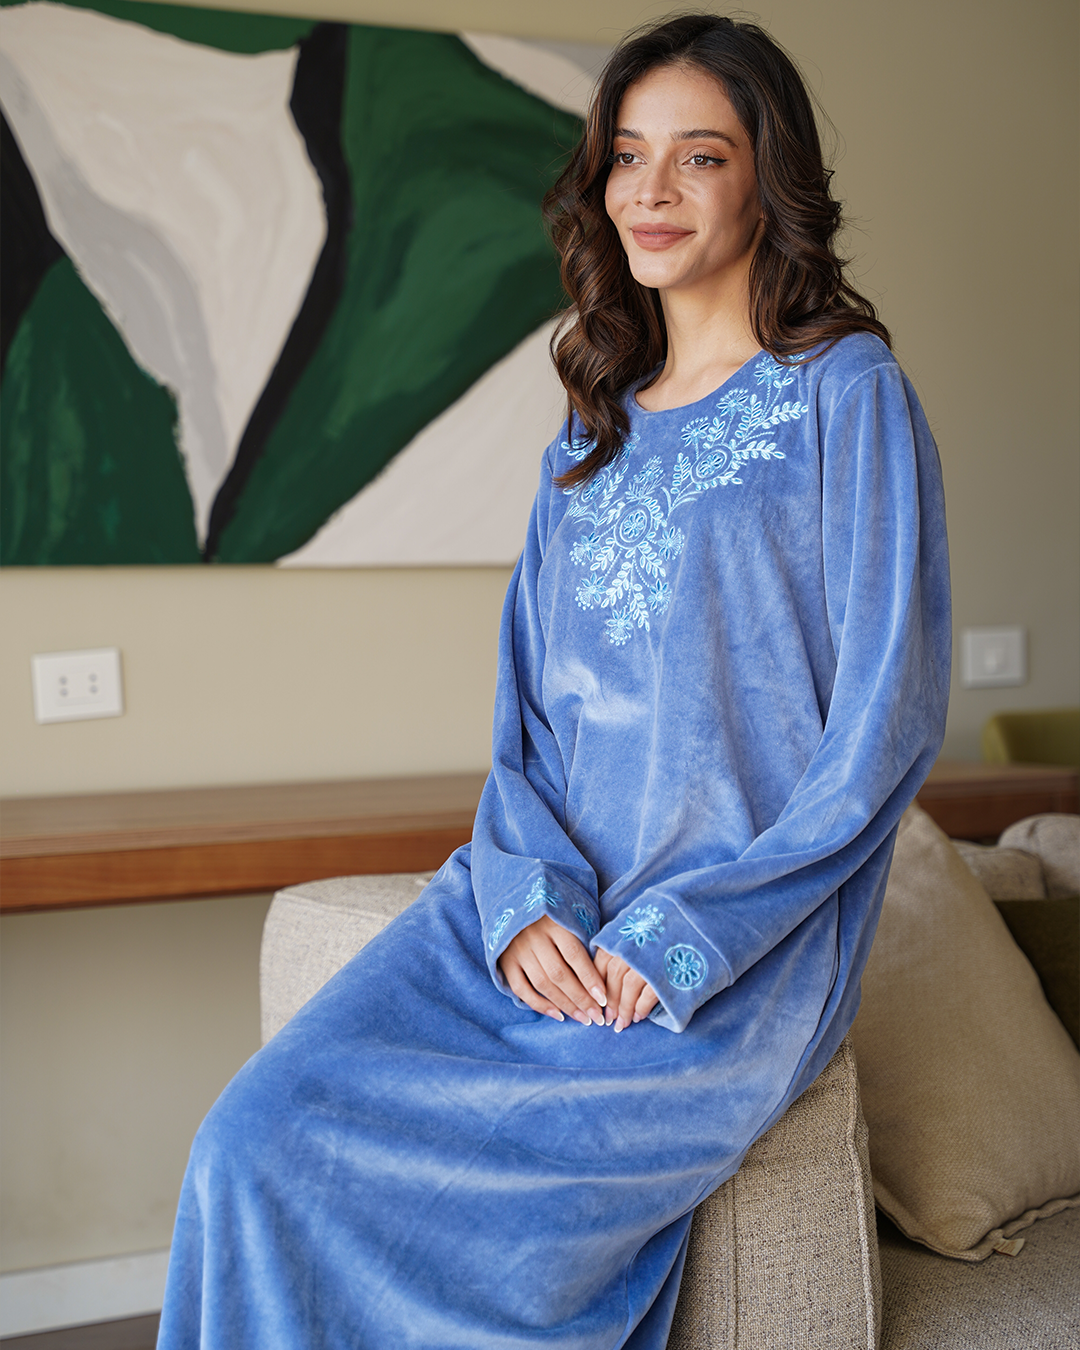 Women's nightgown, zippered in the back, velor embroidery